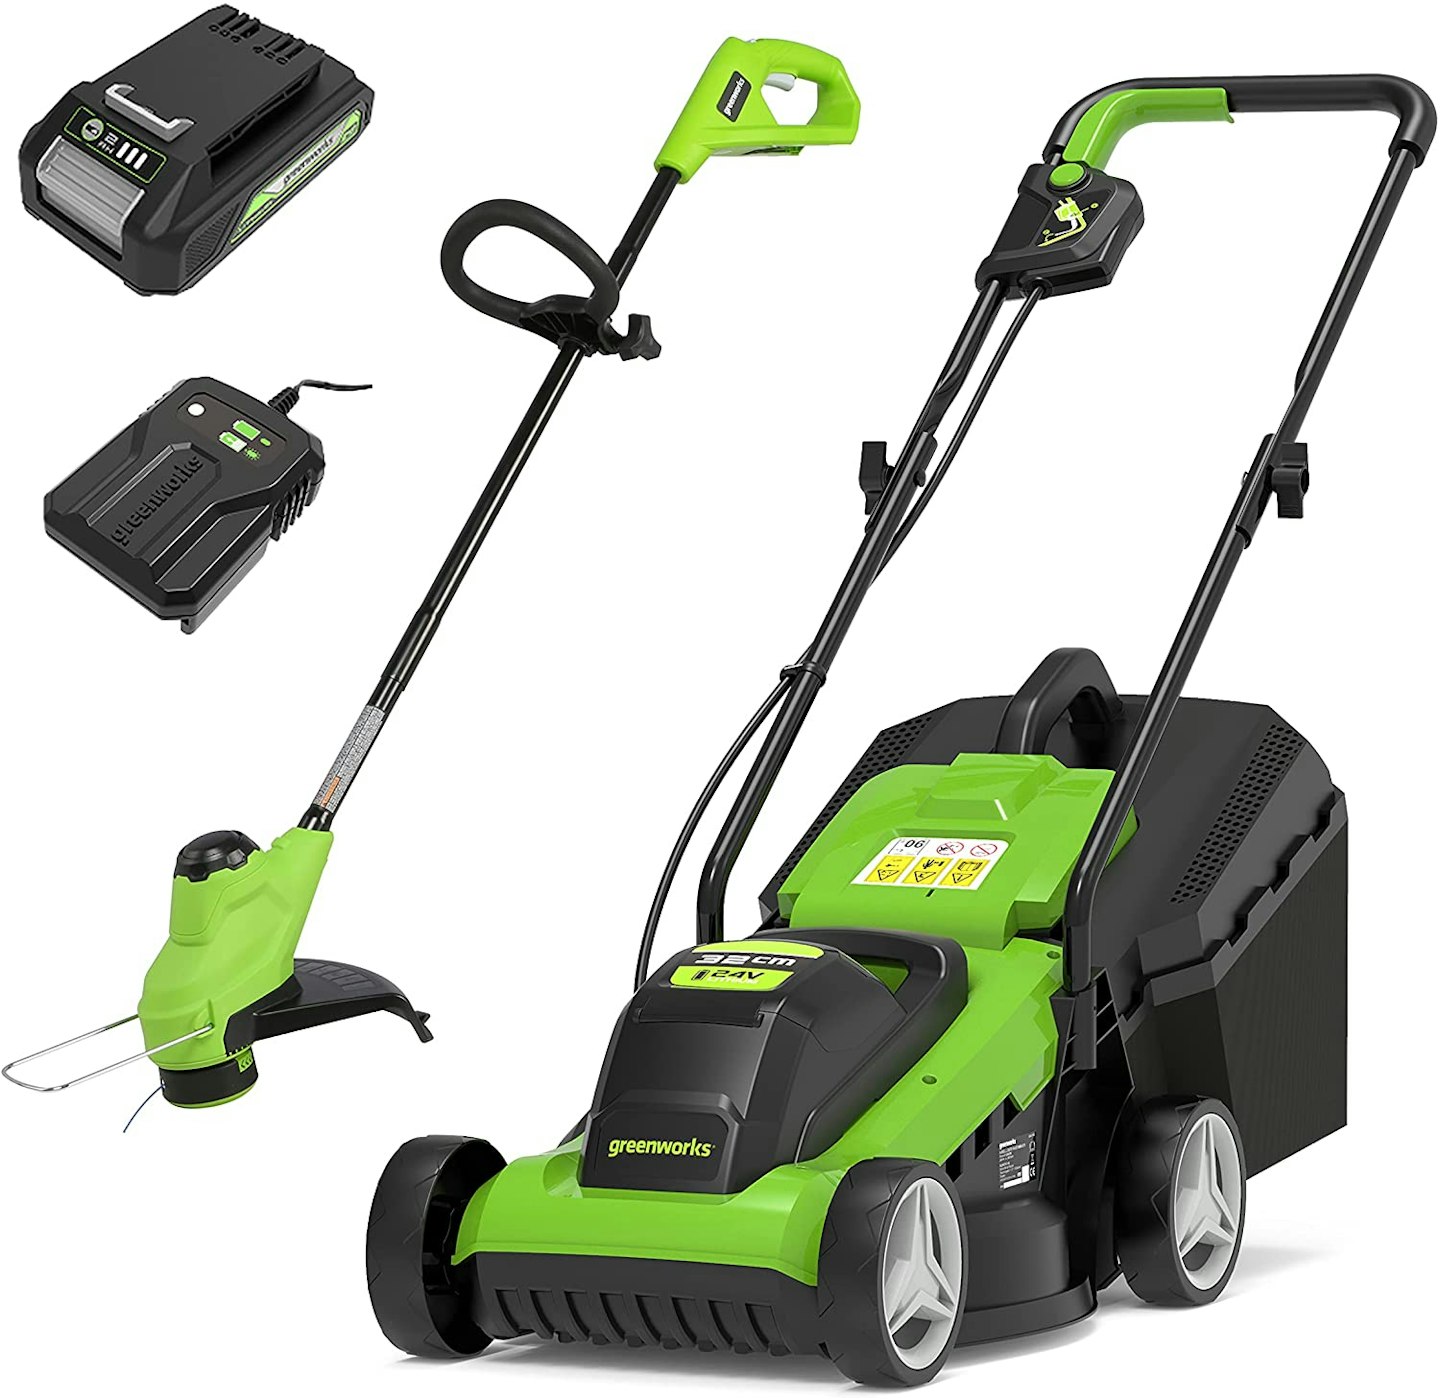 Greenworks battery-powered lawnmower and trimmer